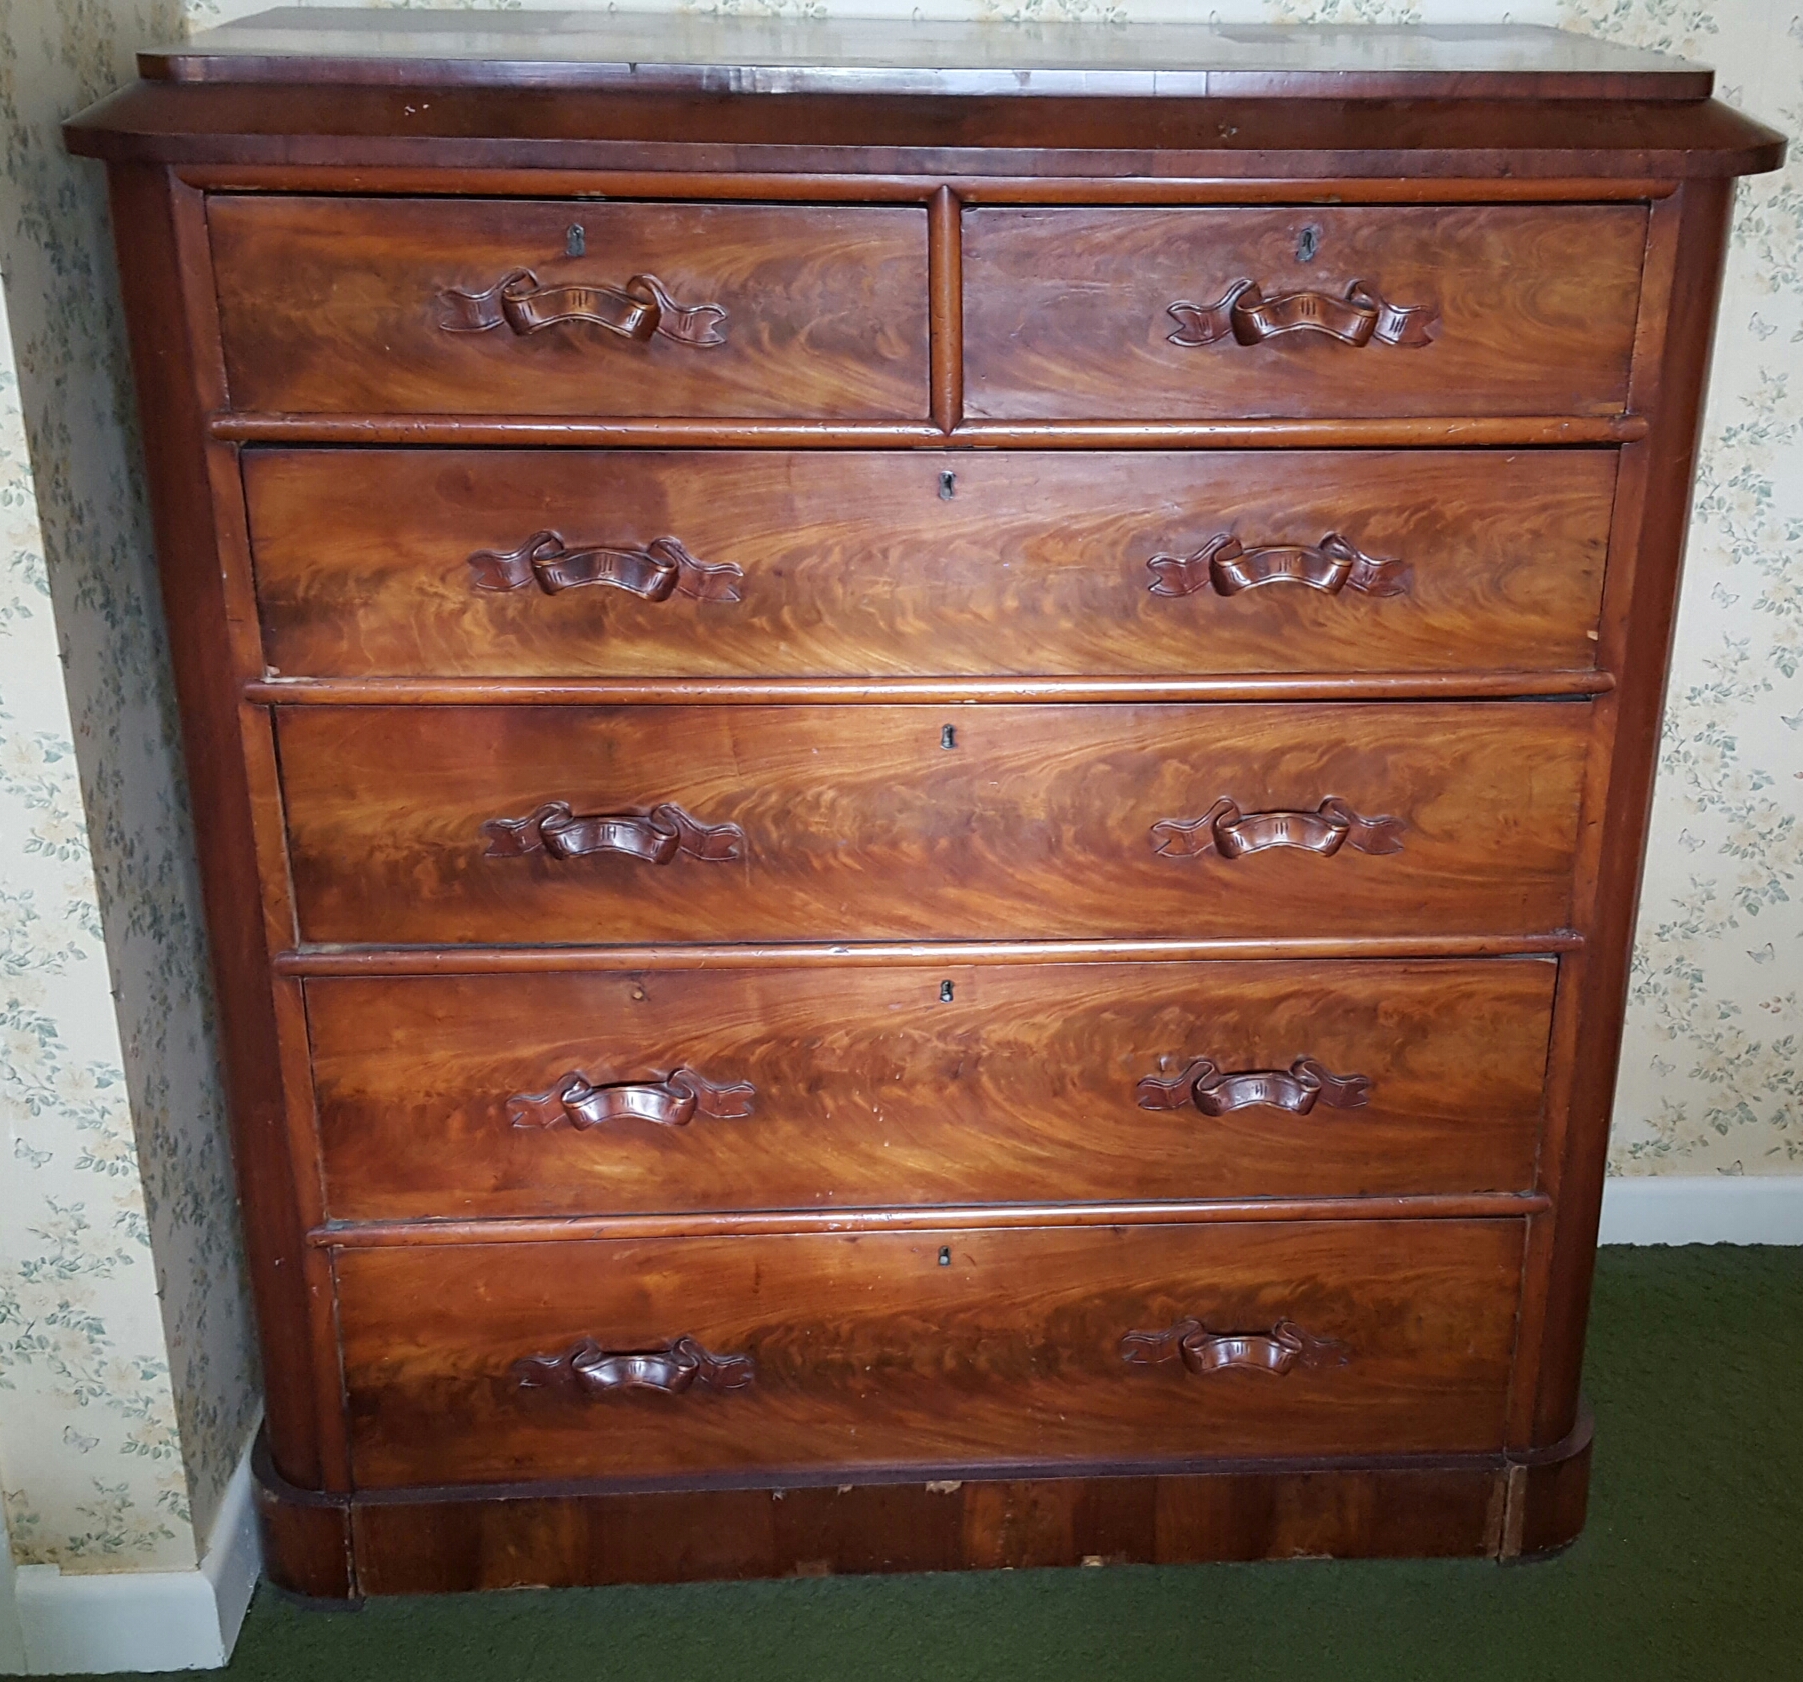 Victorian Set of Drawers 2 over 4